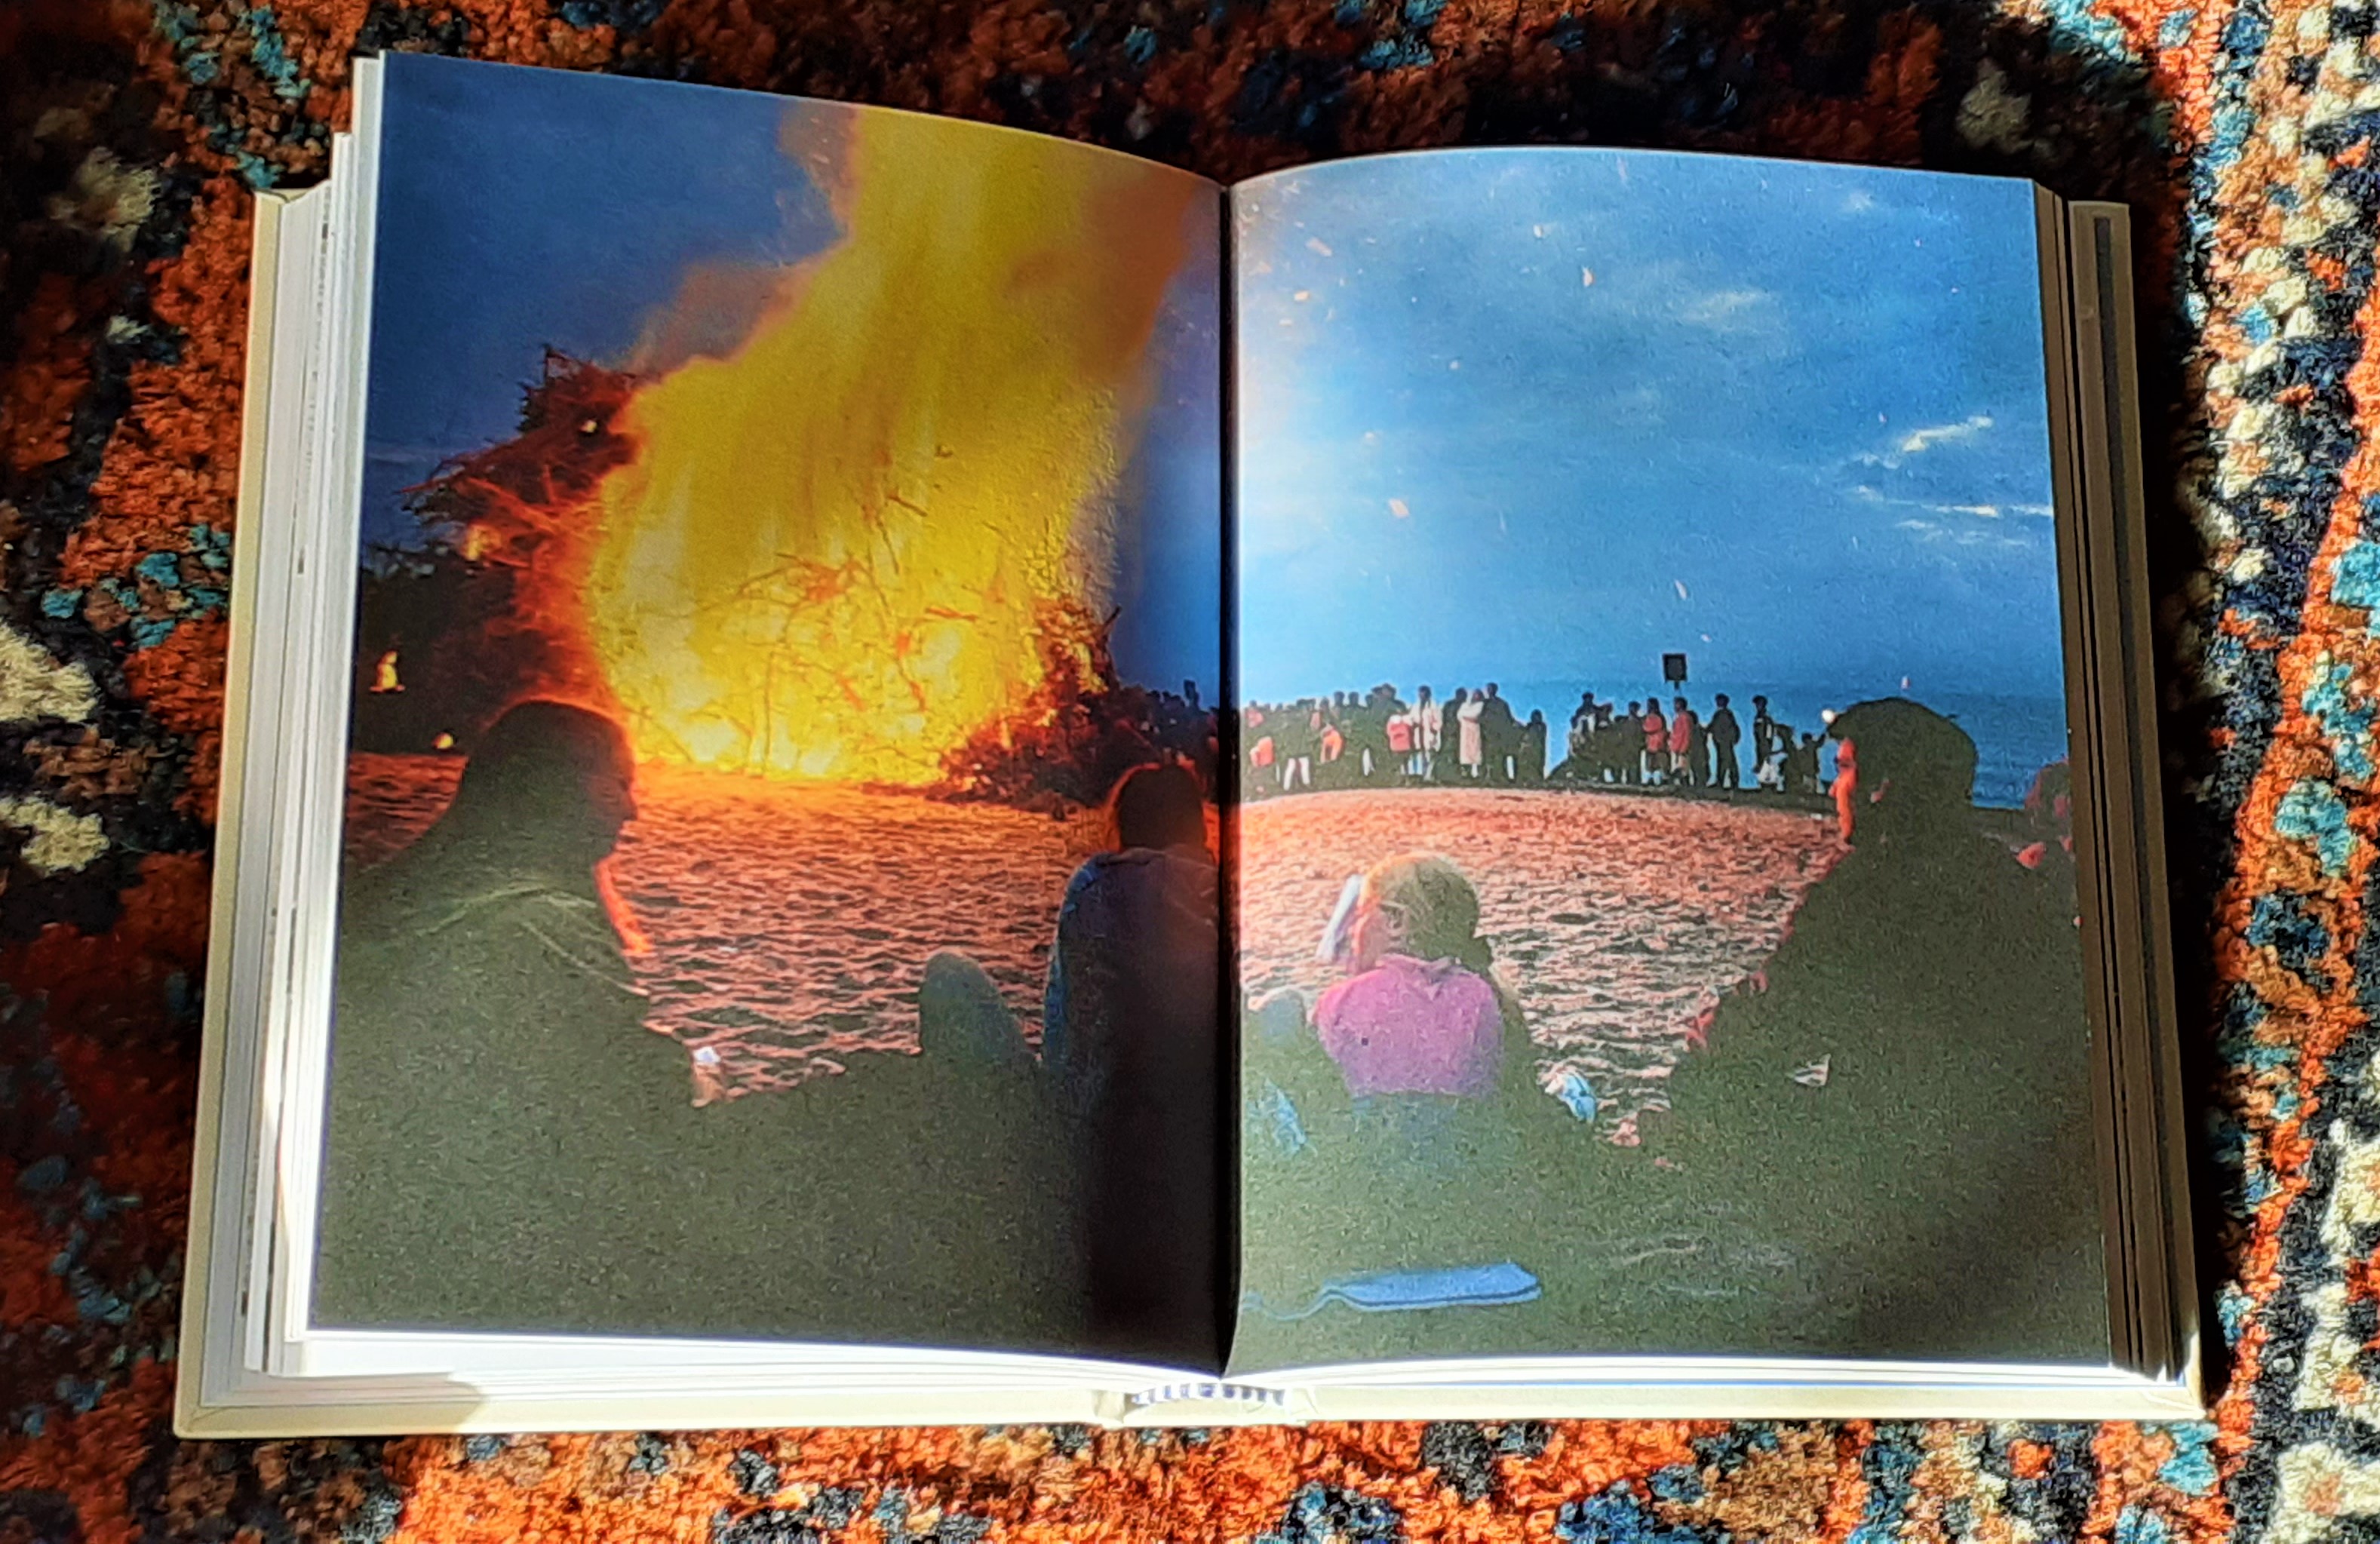 Inside the book